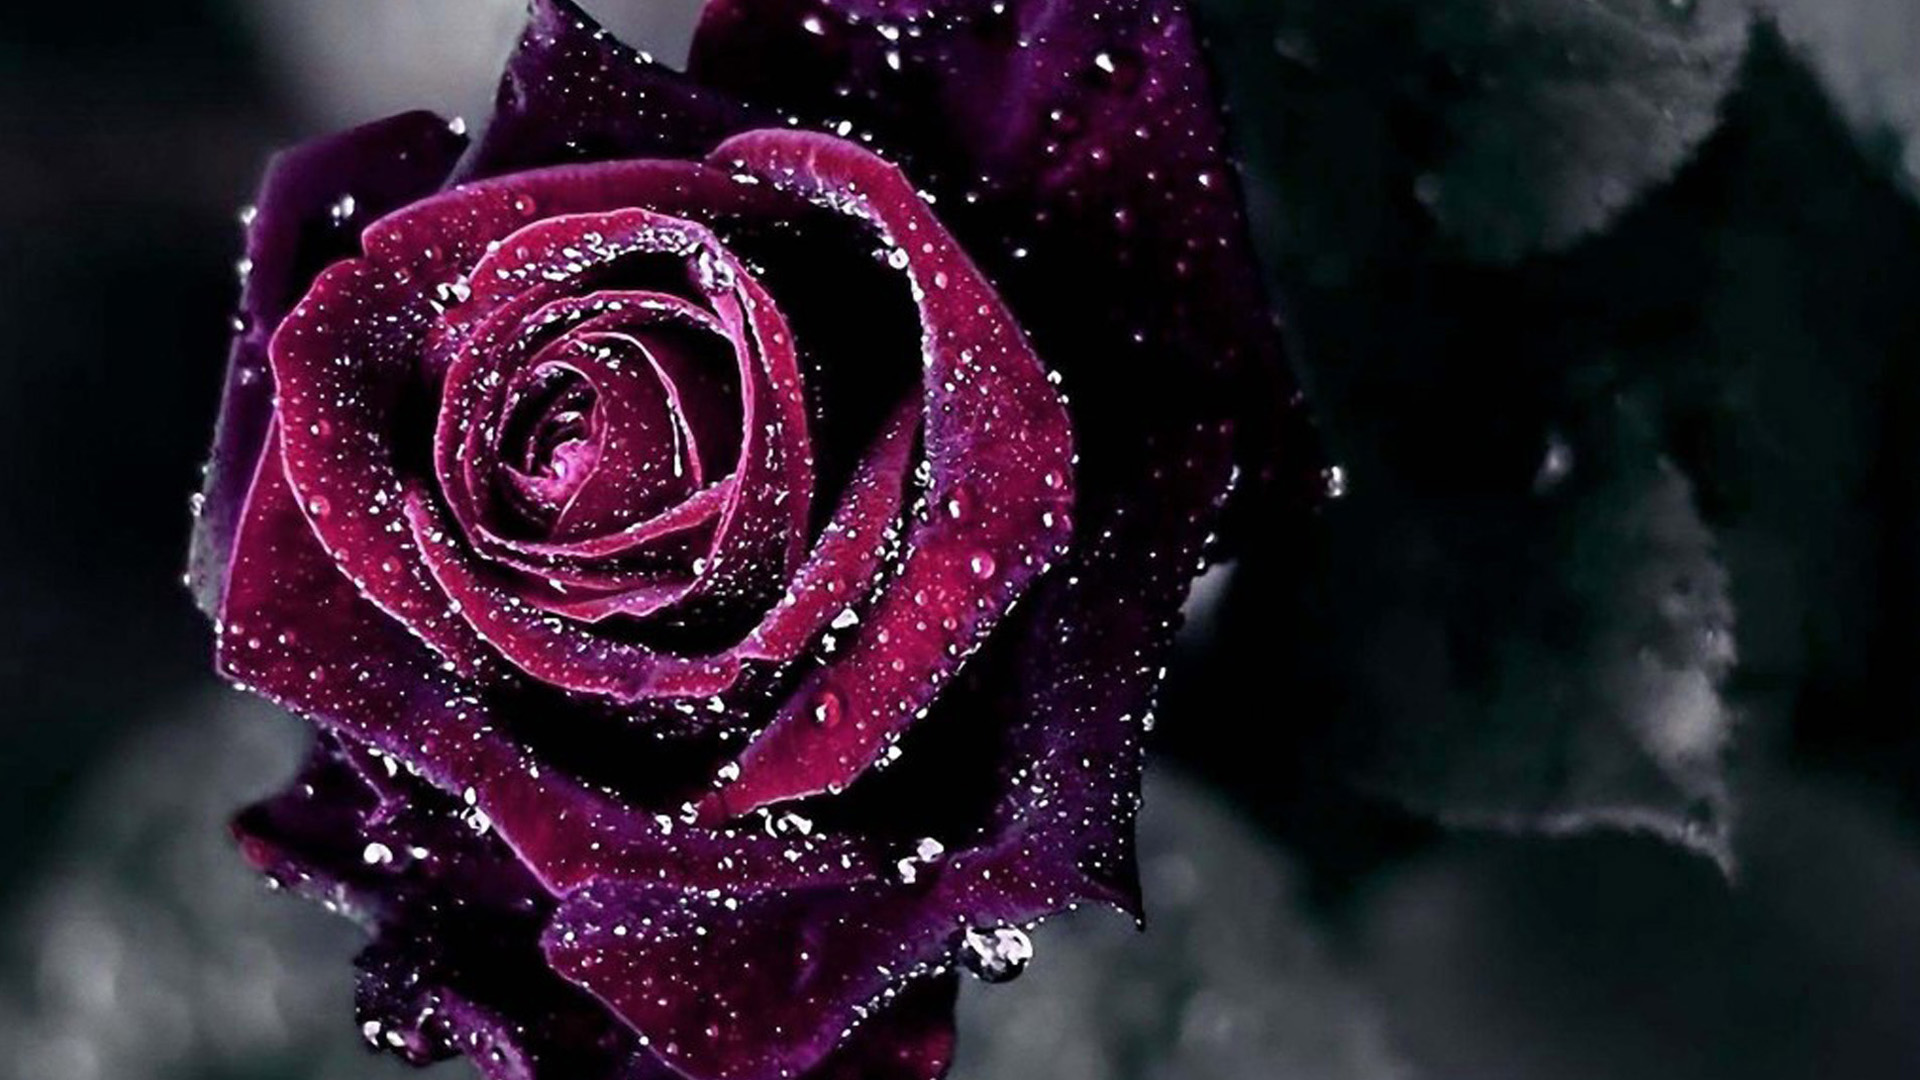 High Definition Live Rose Backgrounds - 1920x1080 Wallpaper 